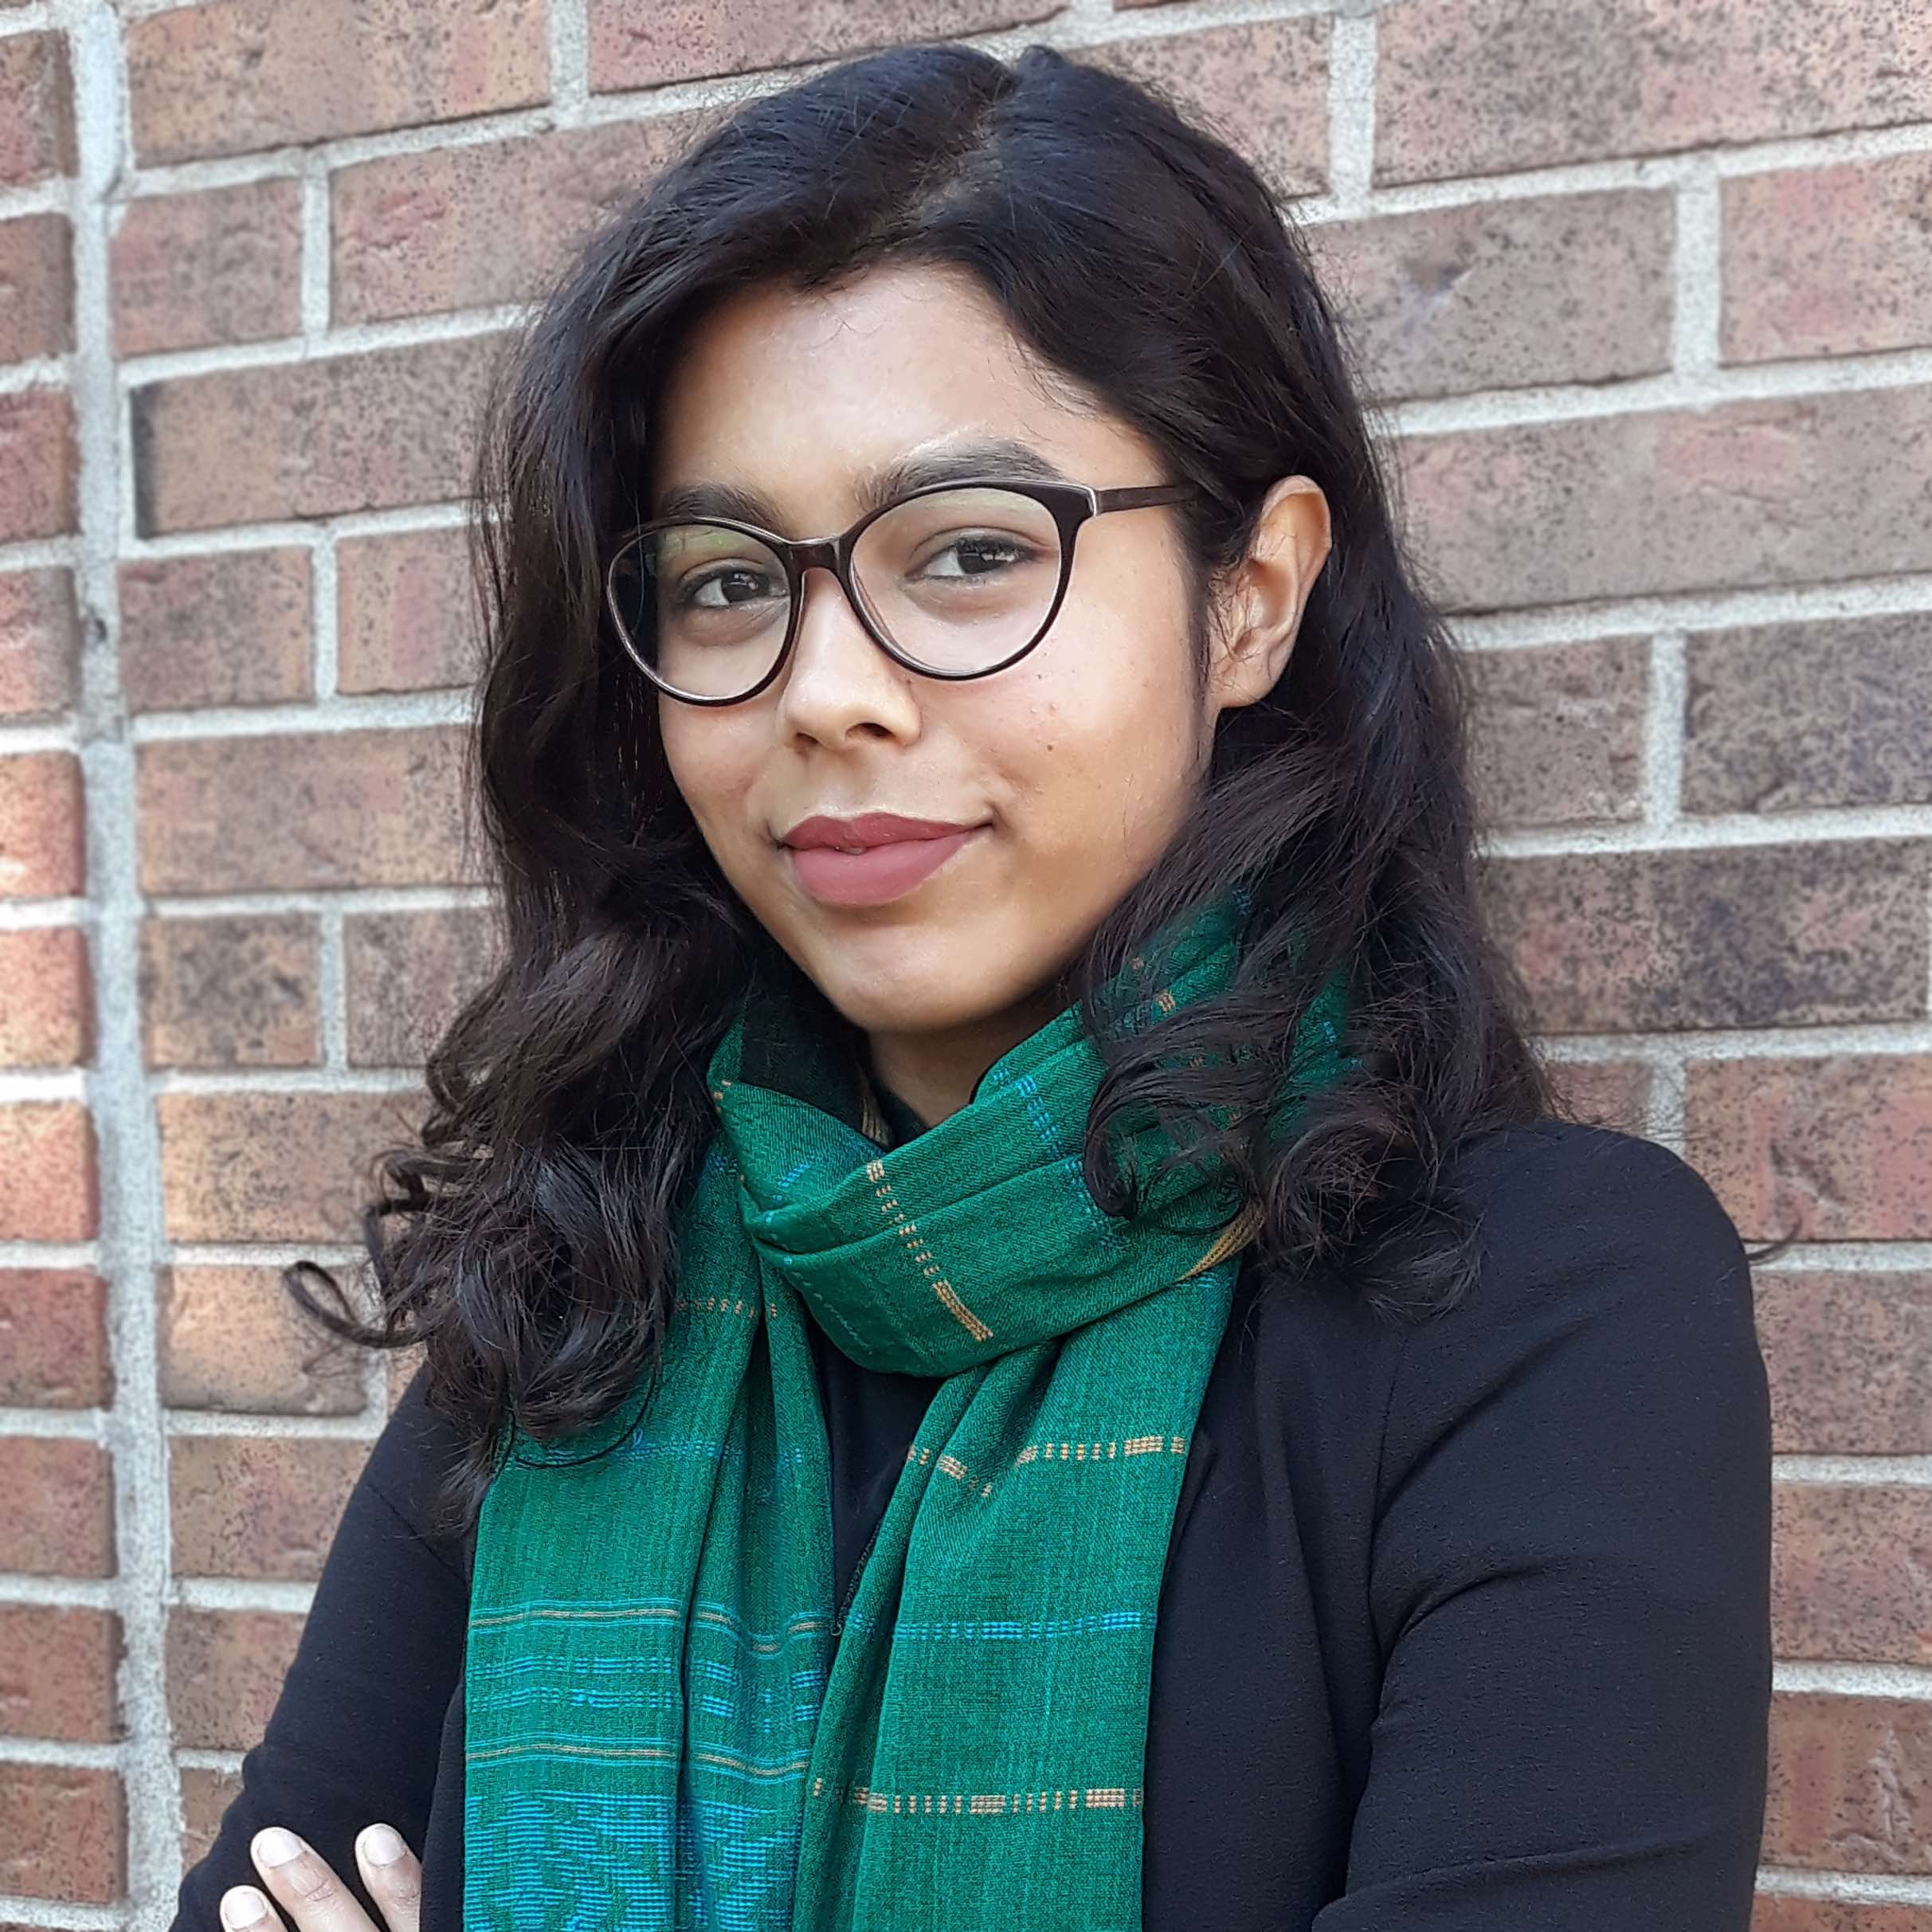 Headshot of Najeeba Ahmed, portrait style, positioned in front of a red brick wall.